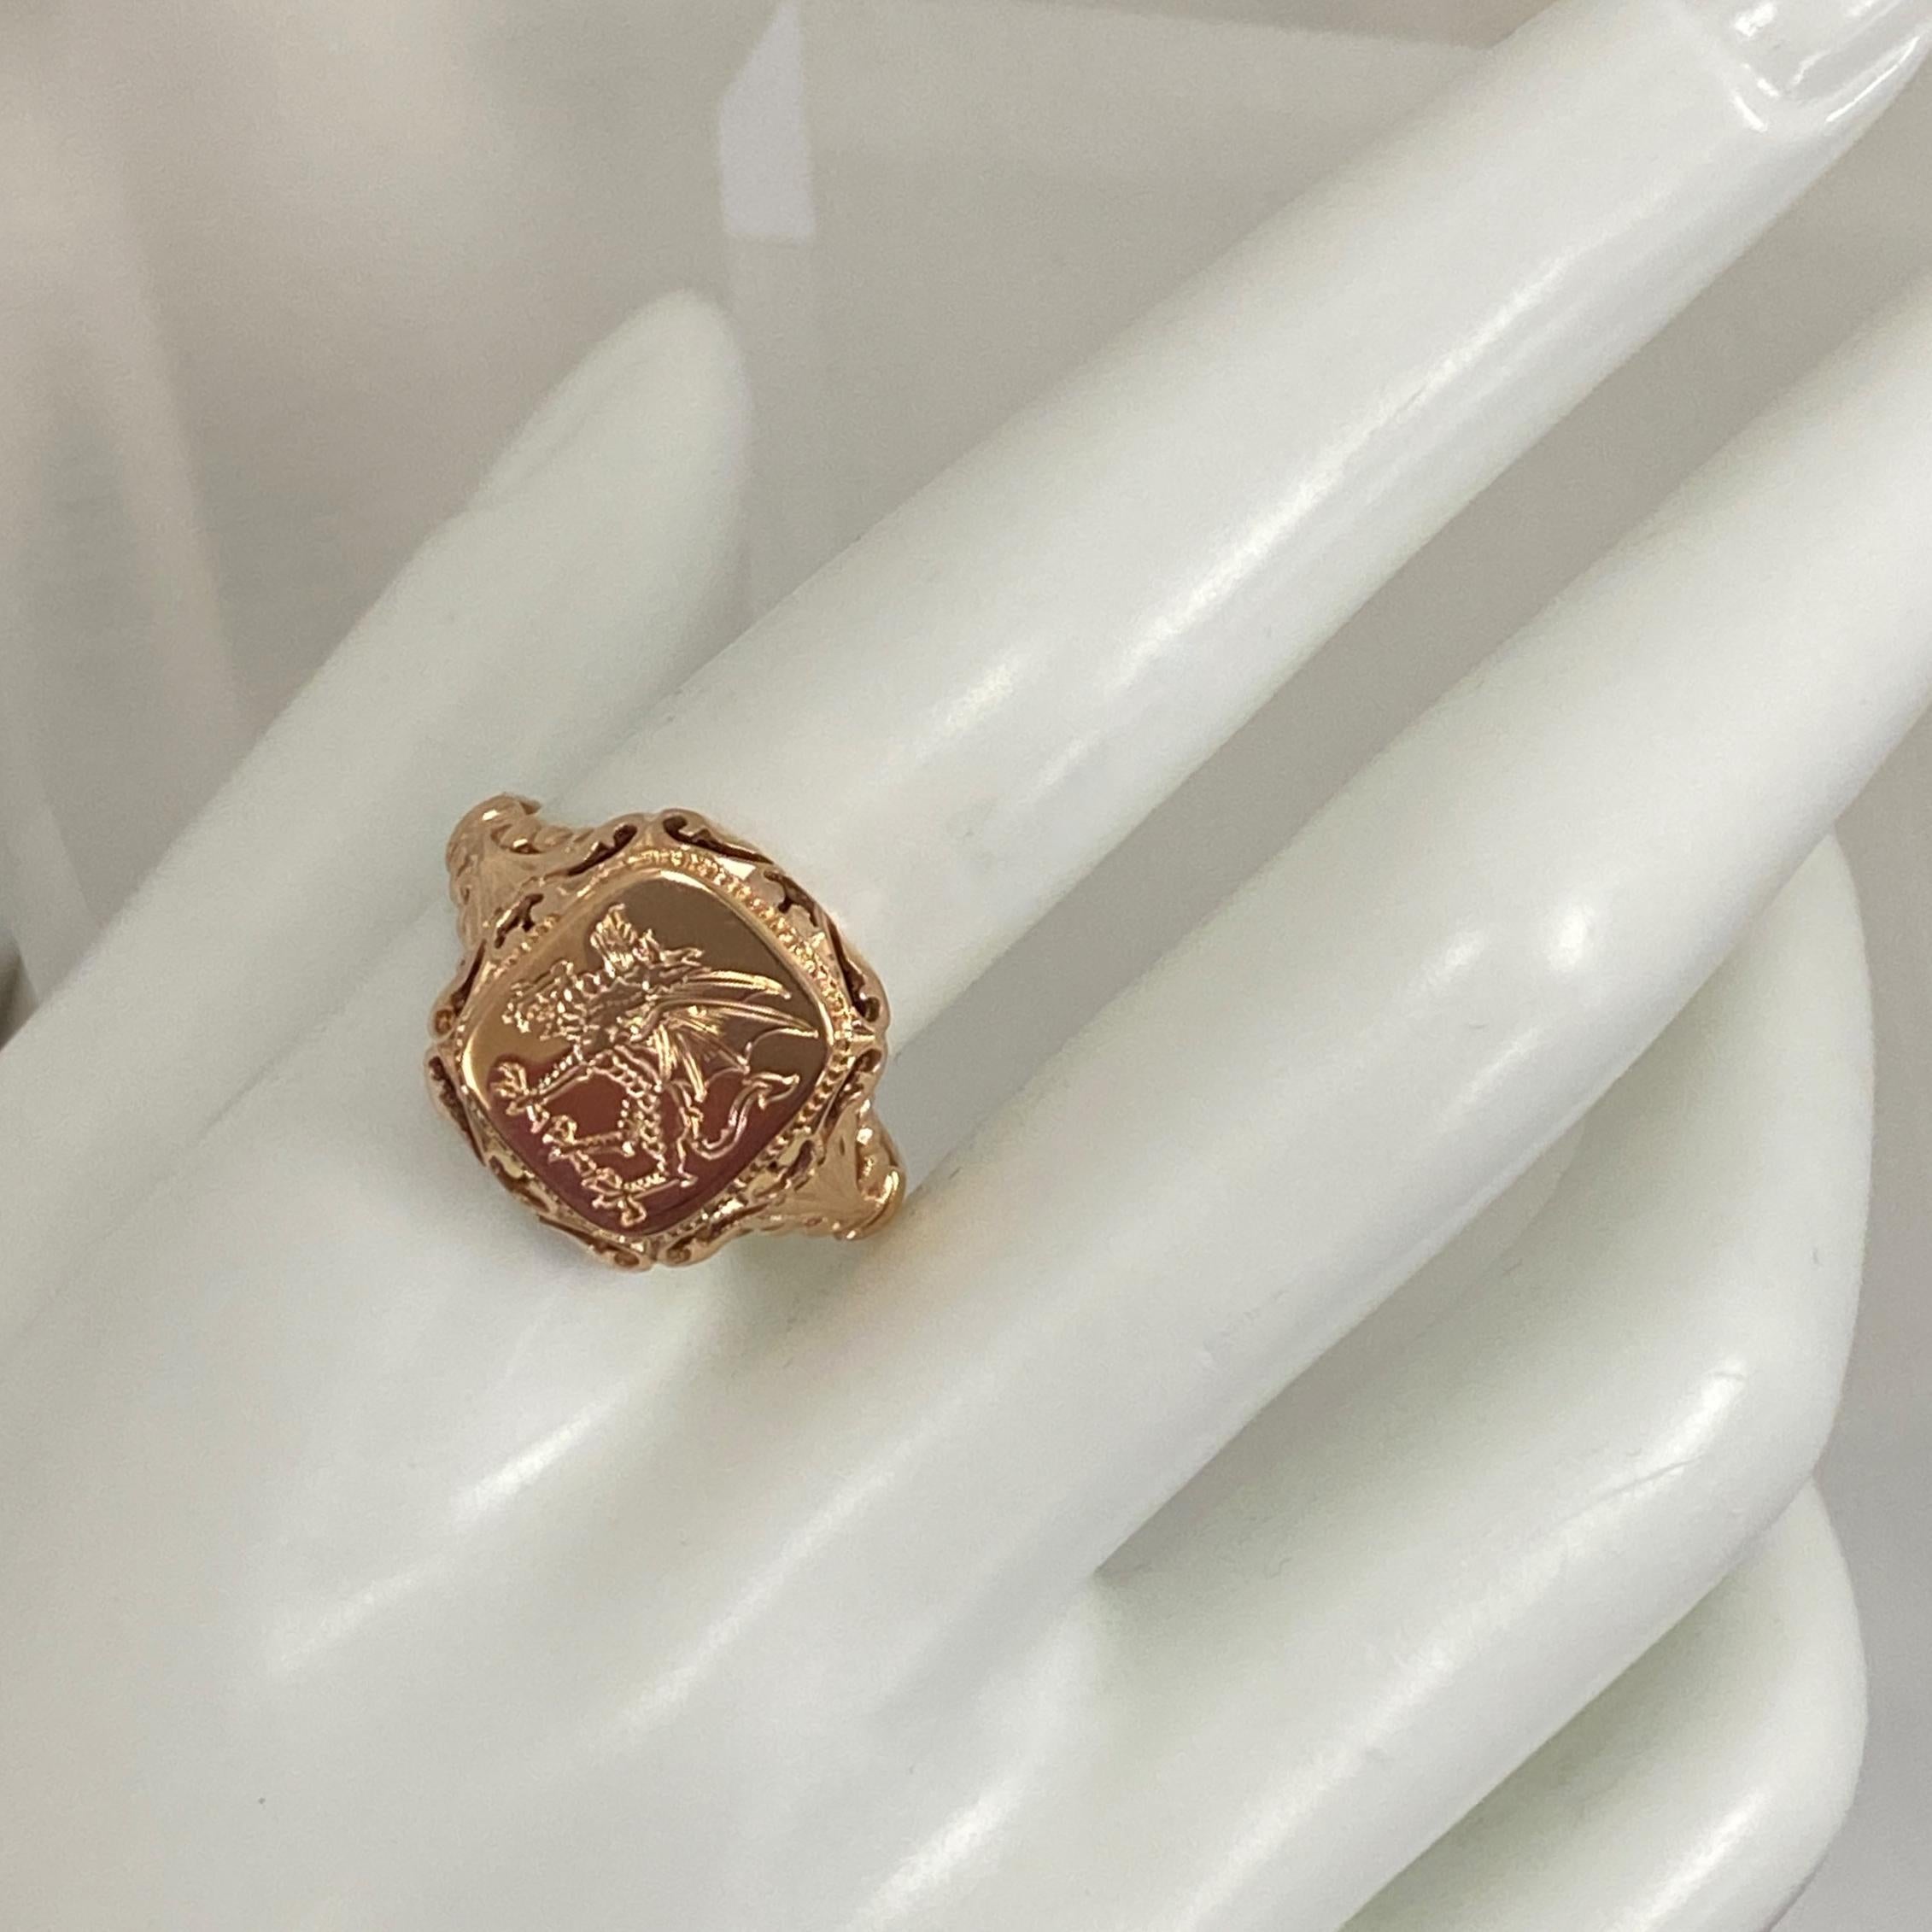 Contemporary Rose Gold Signet Ring with Hand-Engraved Dragon Passant